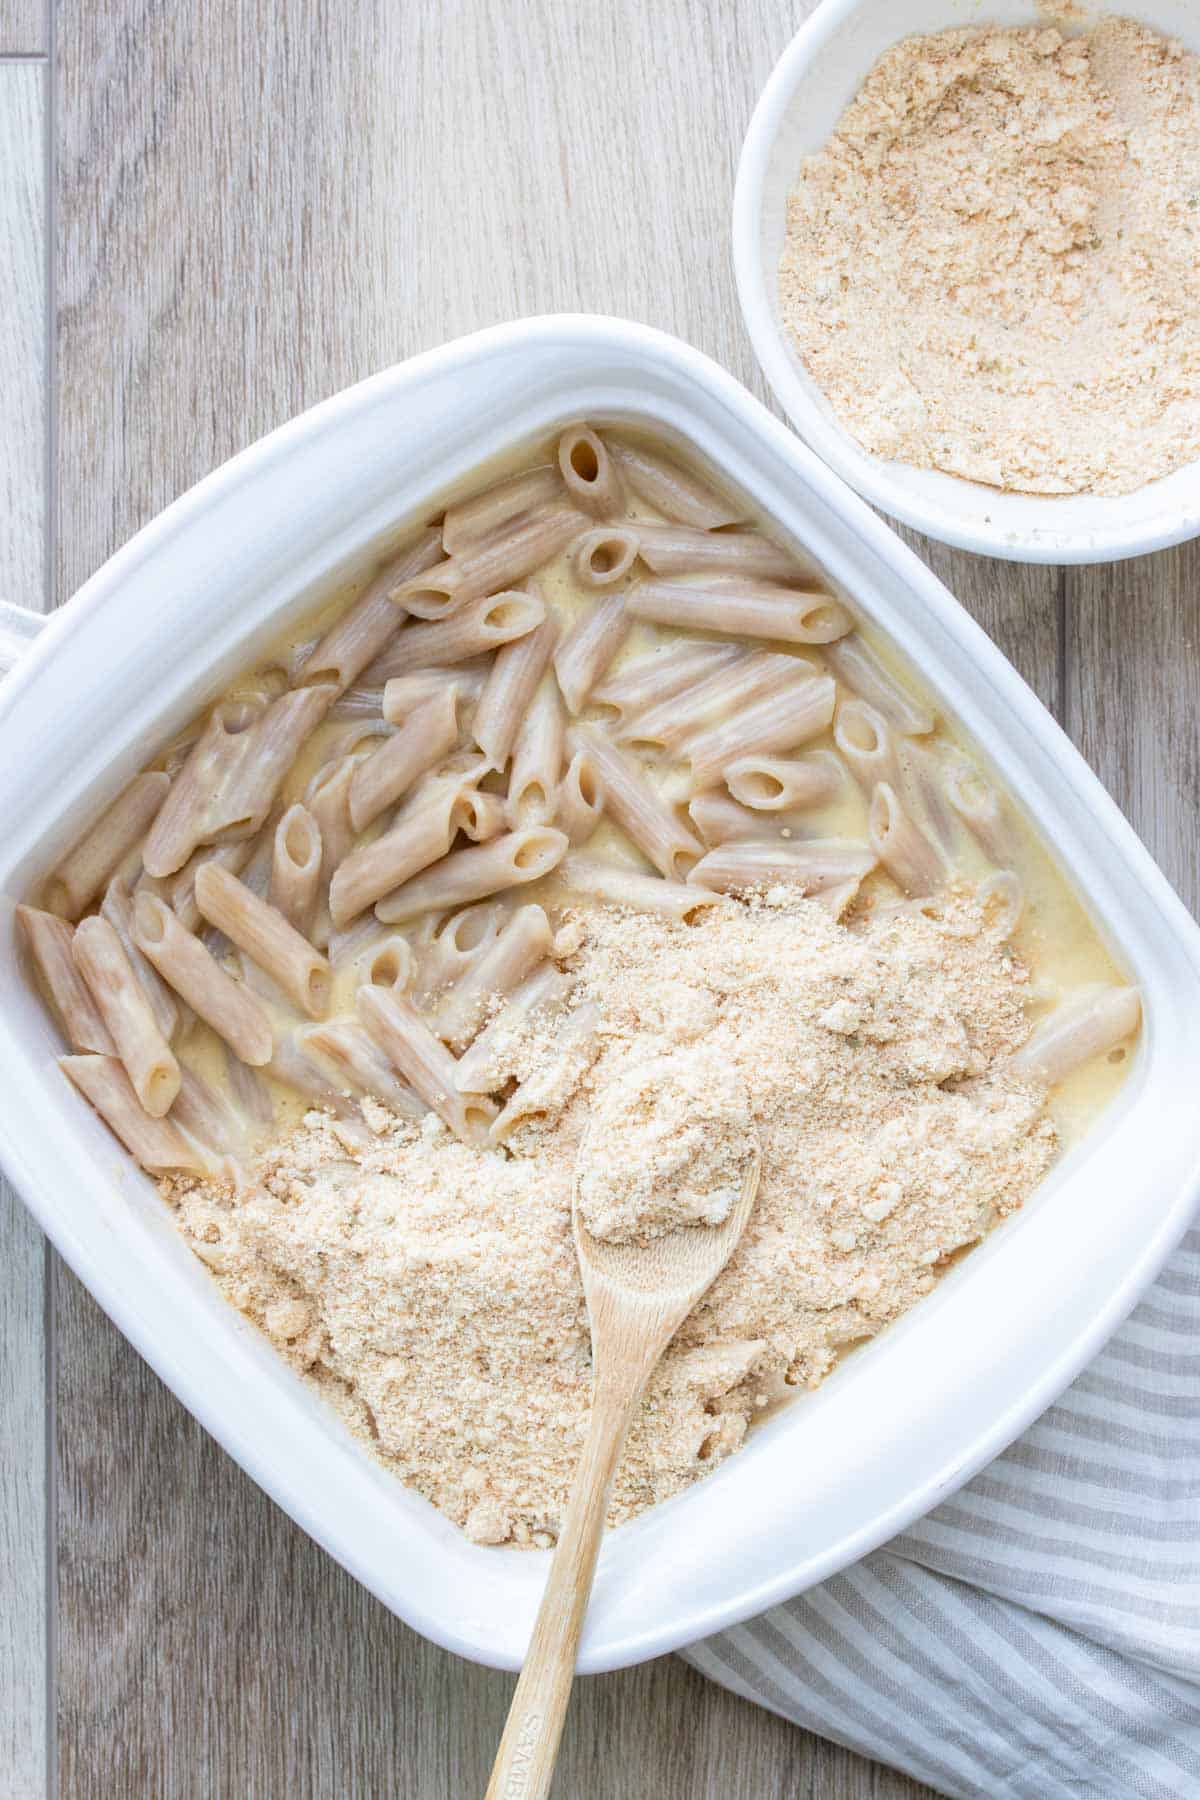 Pasta mixed with a creamy sauce in a white baking dish being covered by crispy topping